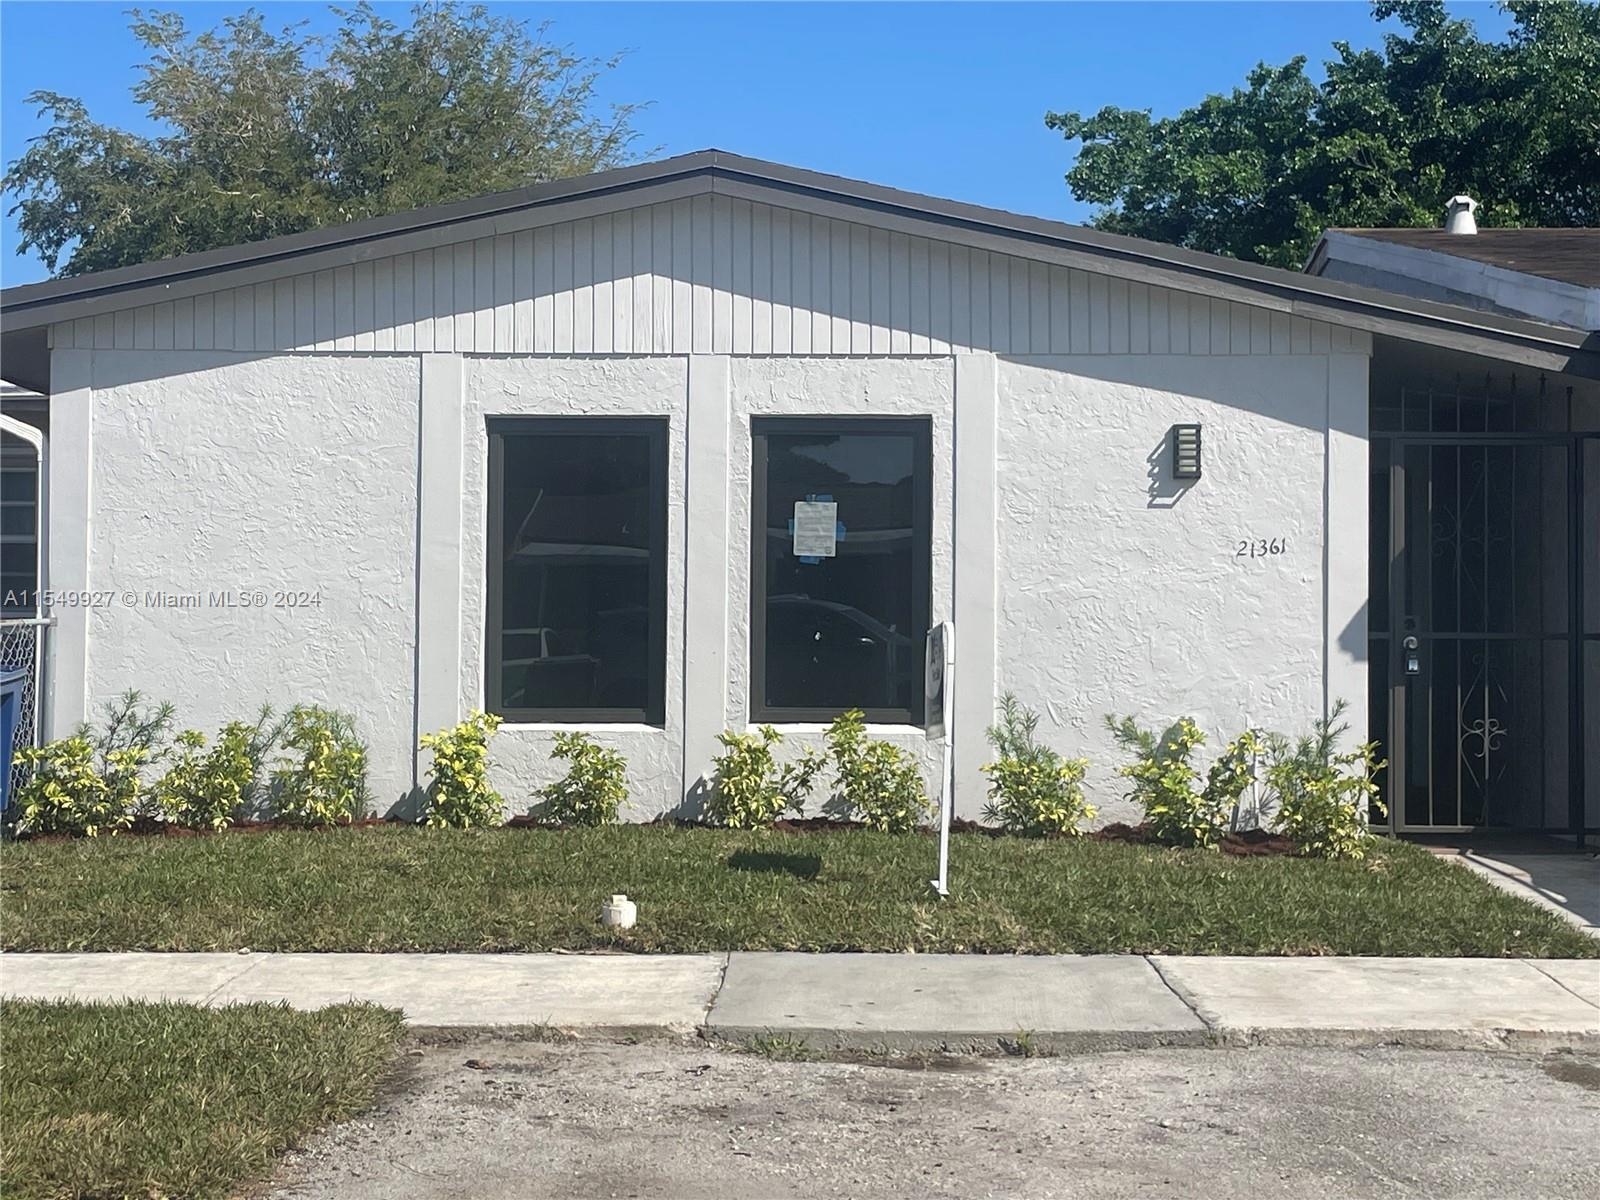 Photo of 21361 NW 39th Ave in Miami Gardens, FL